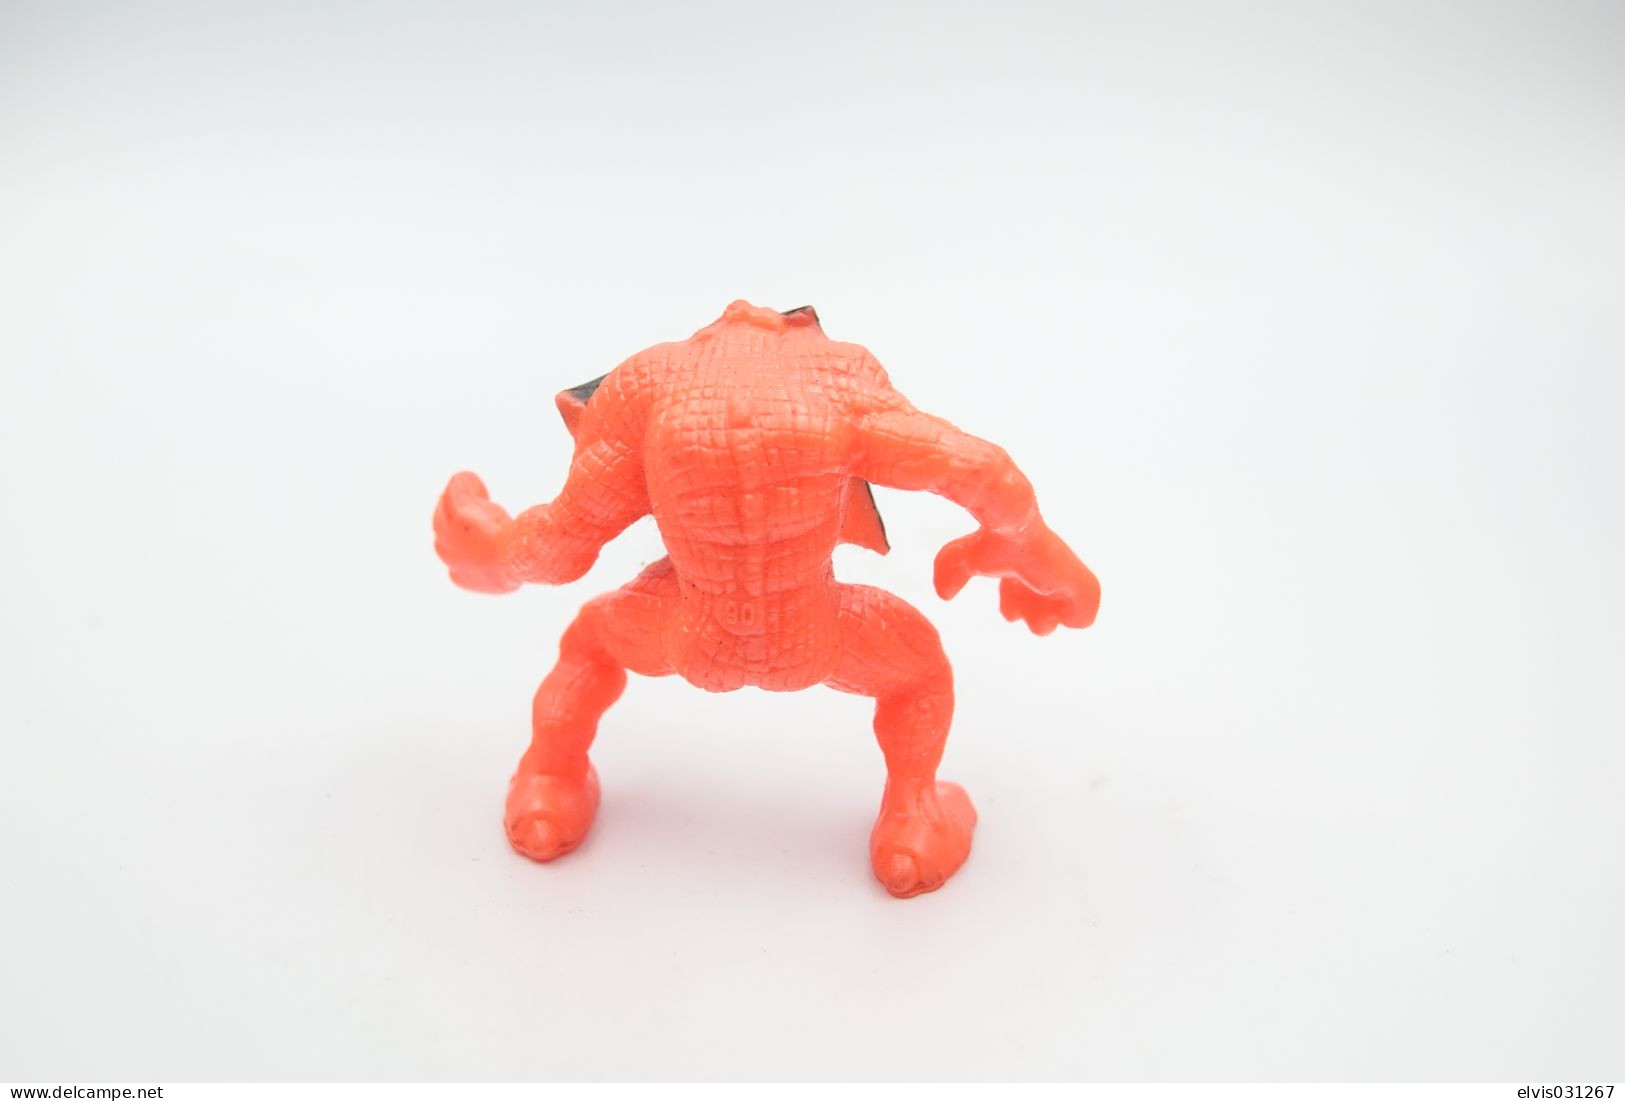 Vintage ACTION FIGURE : MONSTER IN MY POCKET : SERIES 4 : N° 106 Creature From The Closet - Original Matchbox 1992 - Action Man